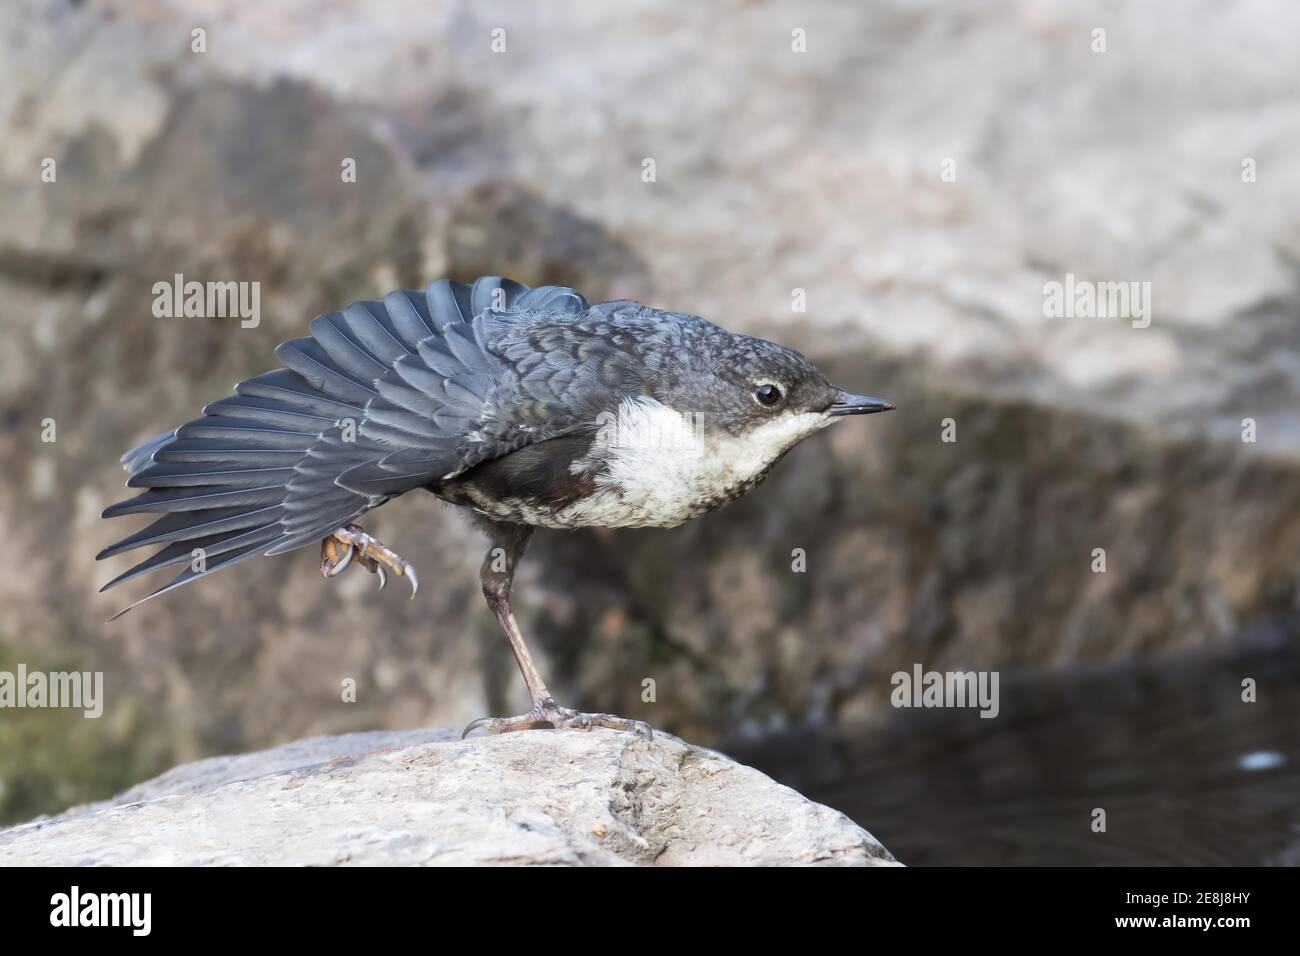 White-breasted dipper (Cinclus cinclus), young bird, standing on stone, spreading its plumage, Hesse, Germany Stock Photo